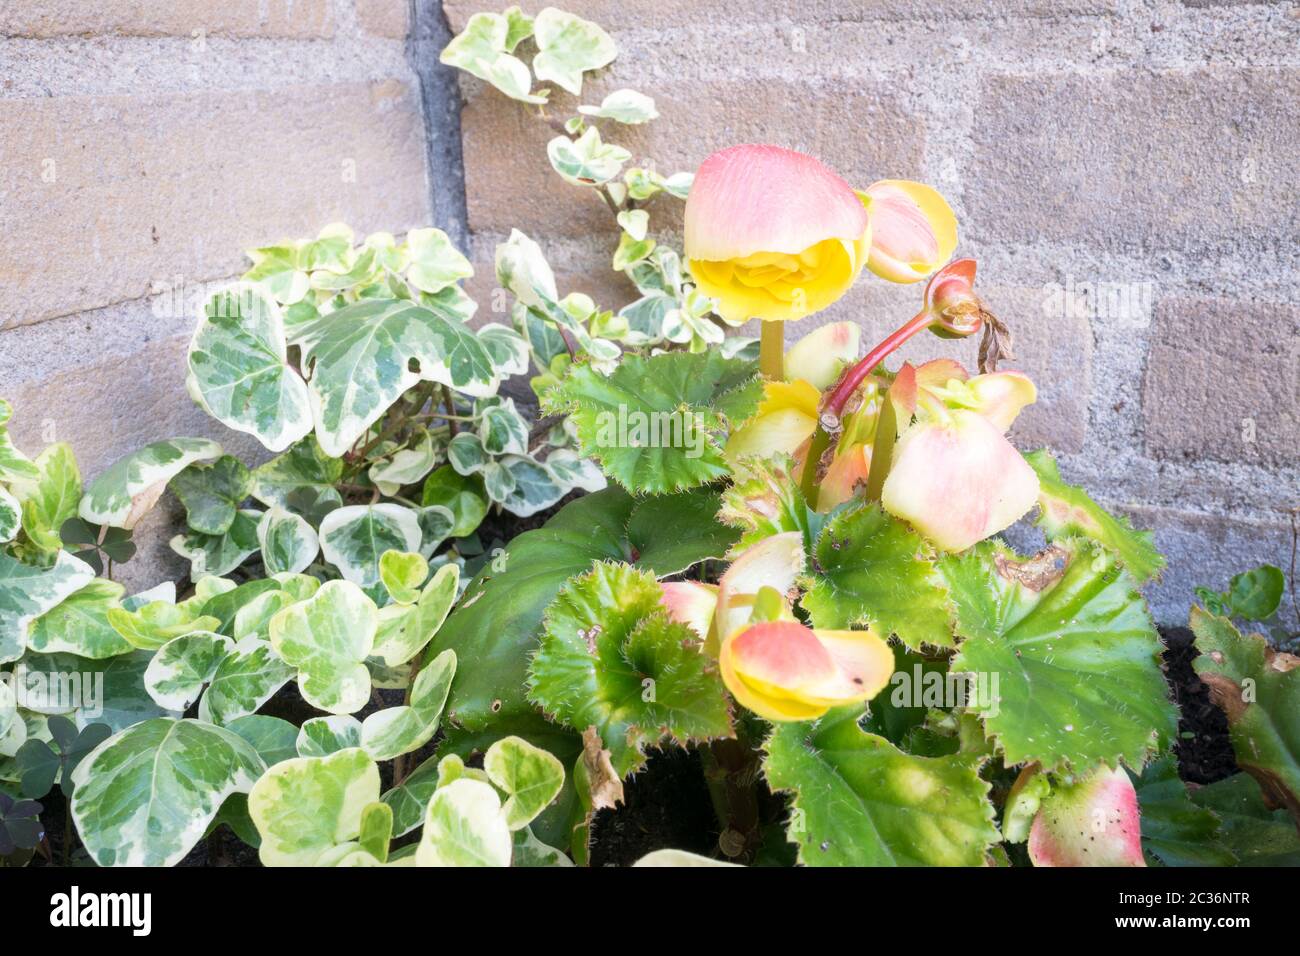 Tuberous Begonia plant with pink yellow flowers Stock Photo